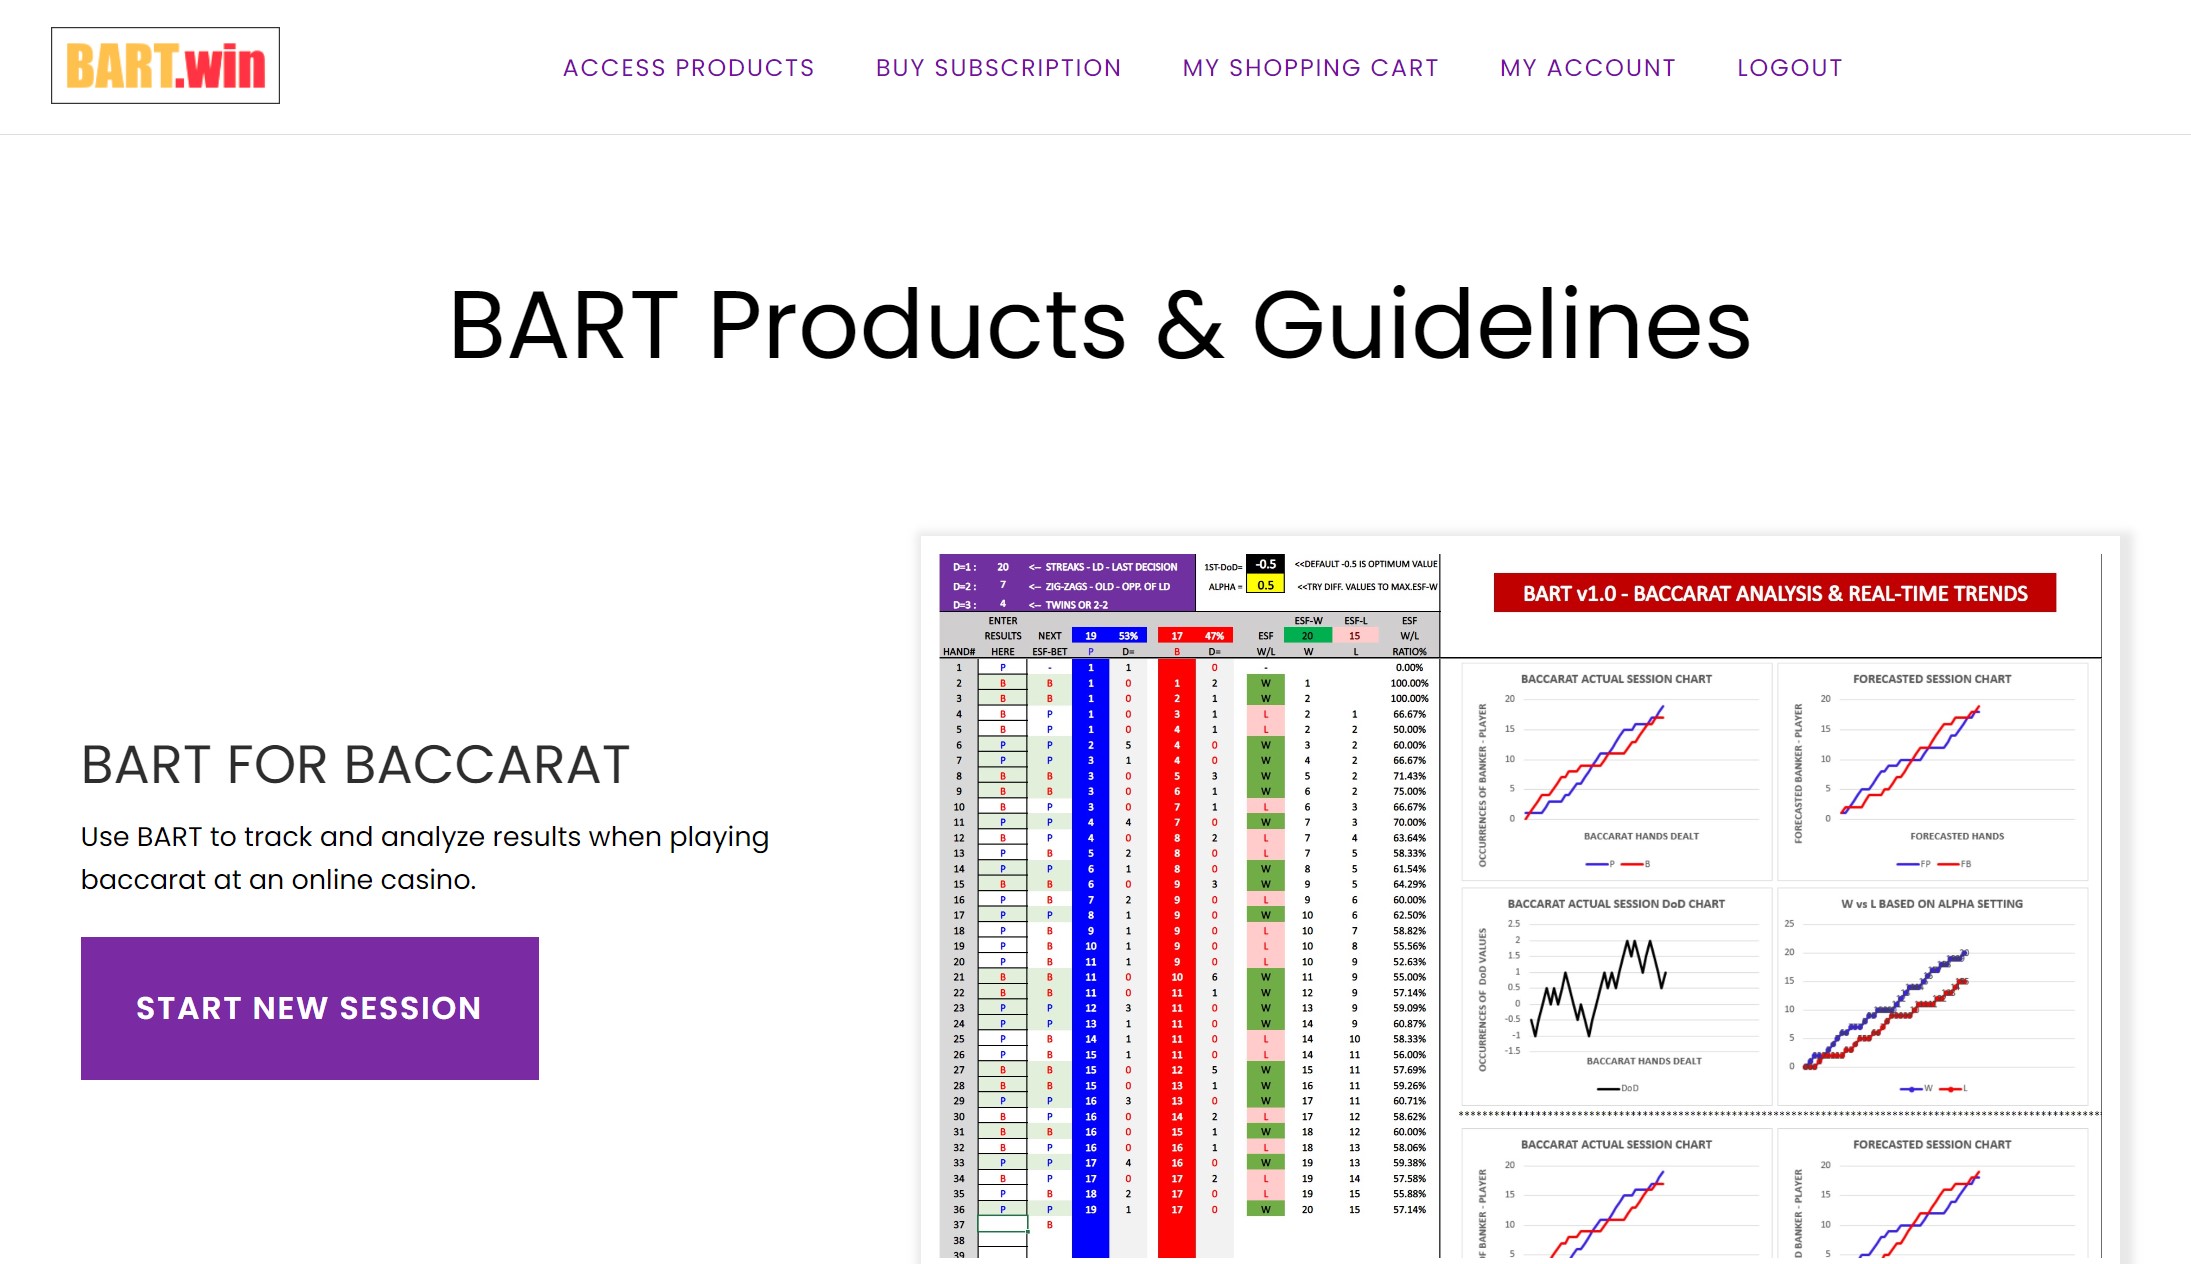 BART Access Products